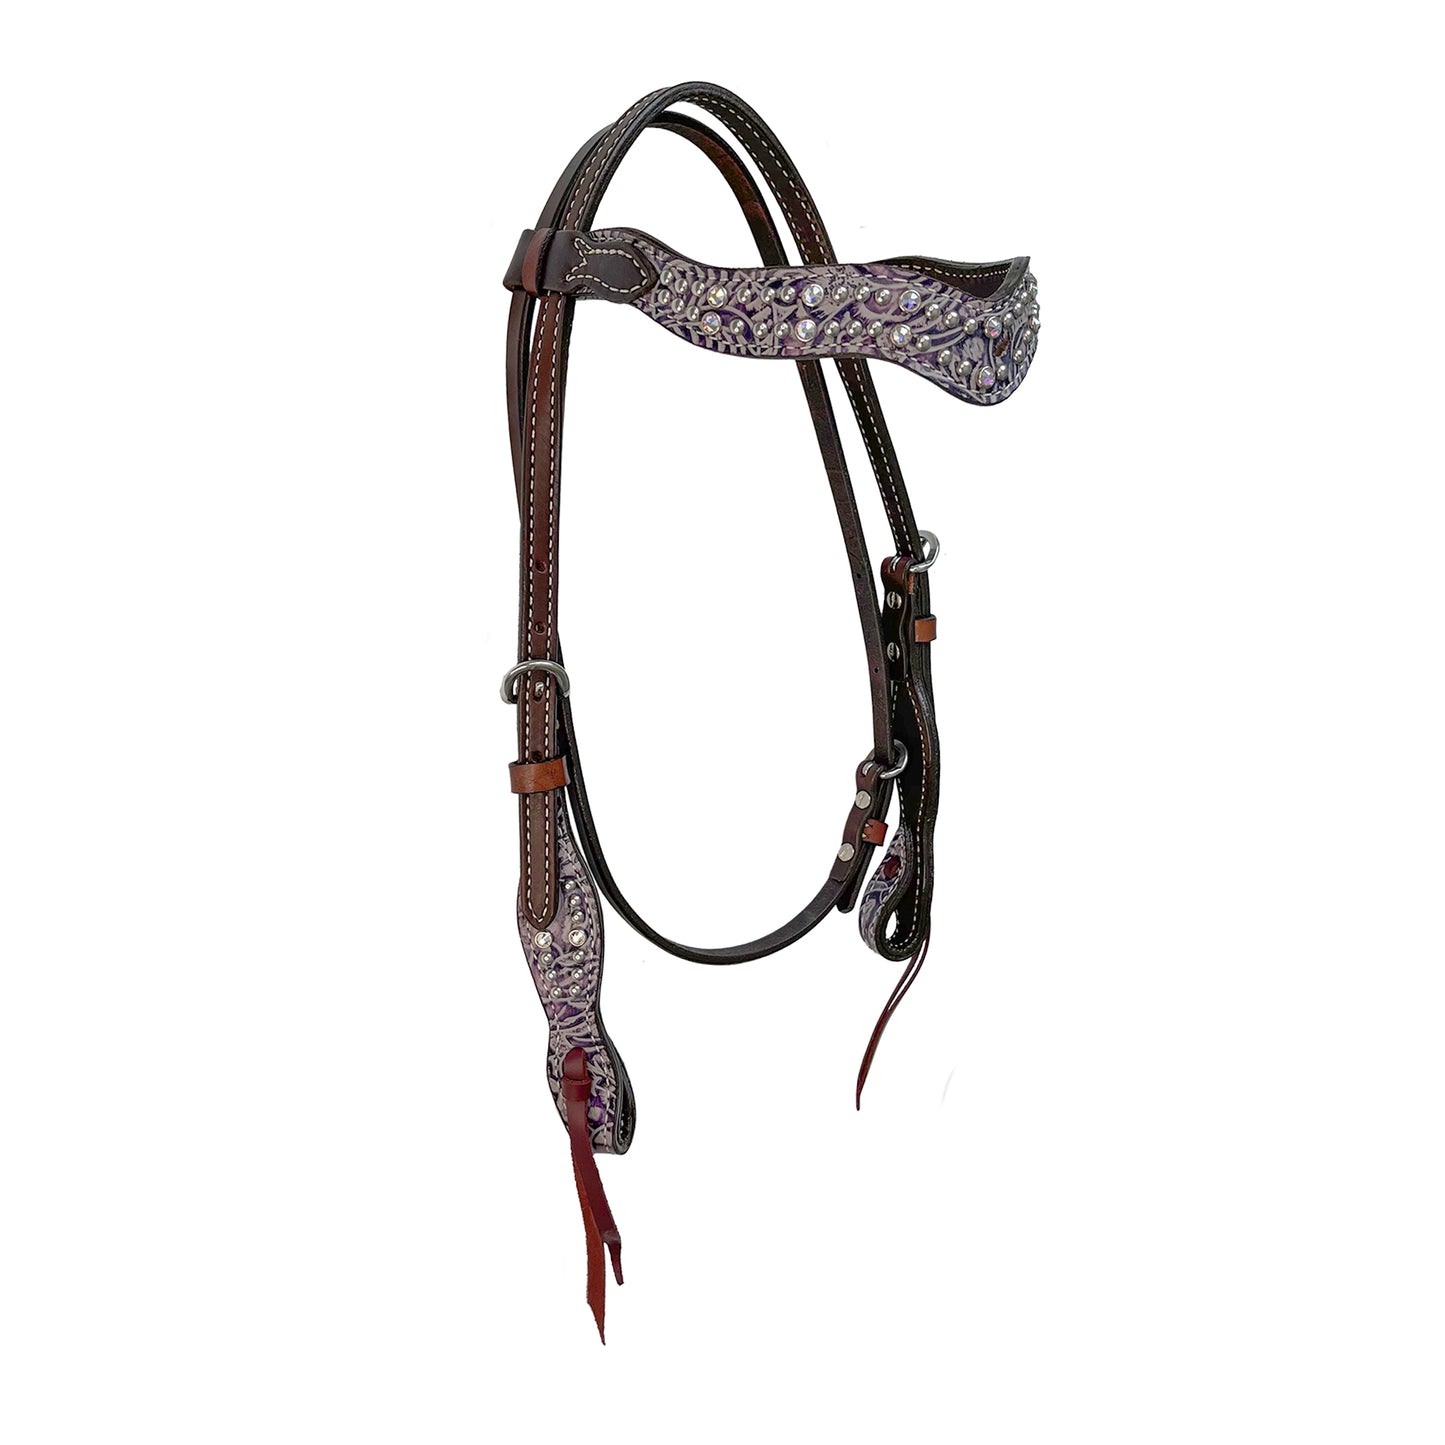 1-1/2"  Wave browband headstall chocolate leather lilac overlay with Swarovski crystals and SS spots.